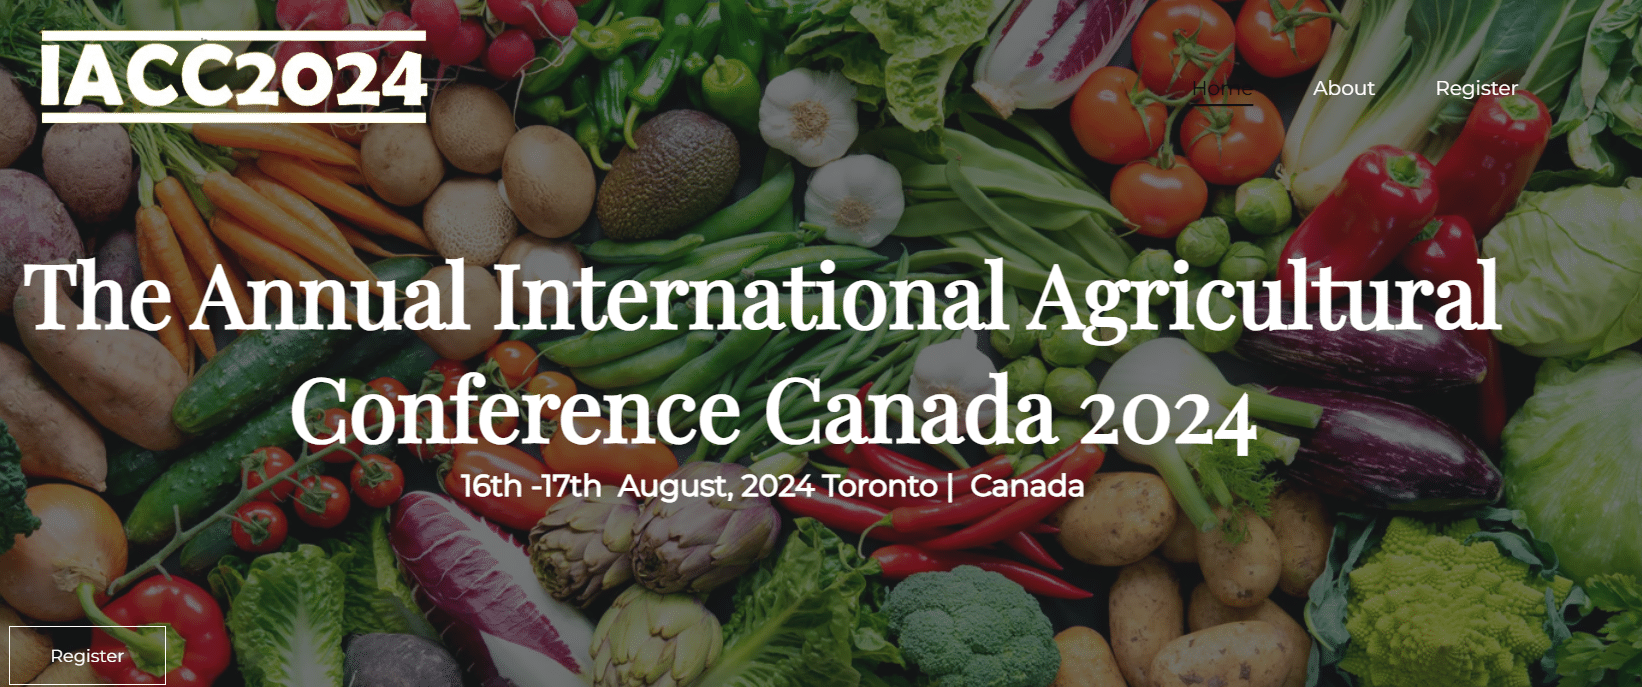 The Annual International Agricultural Conference Canada 2024